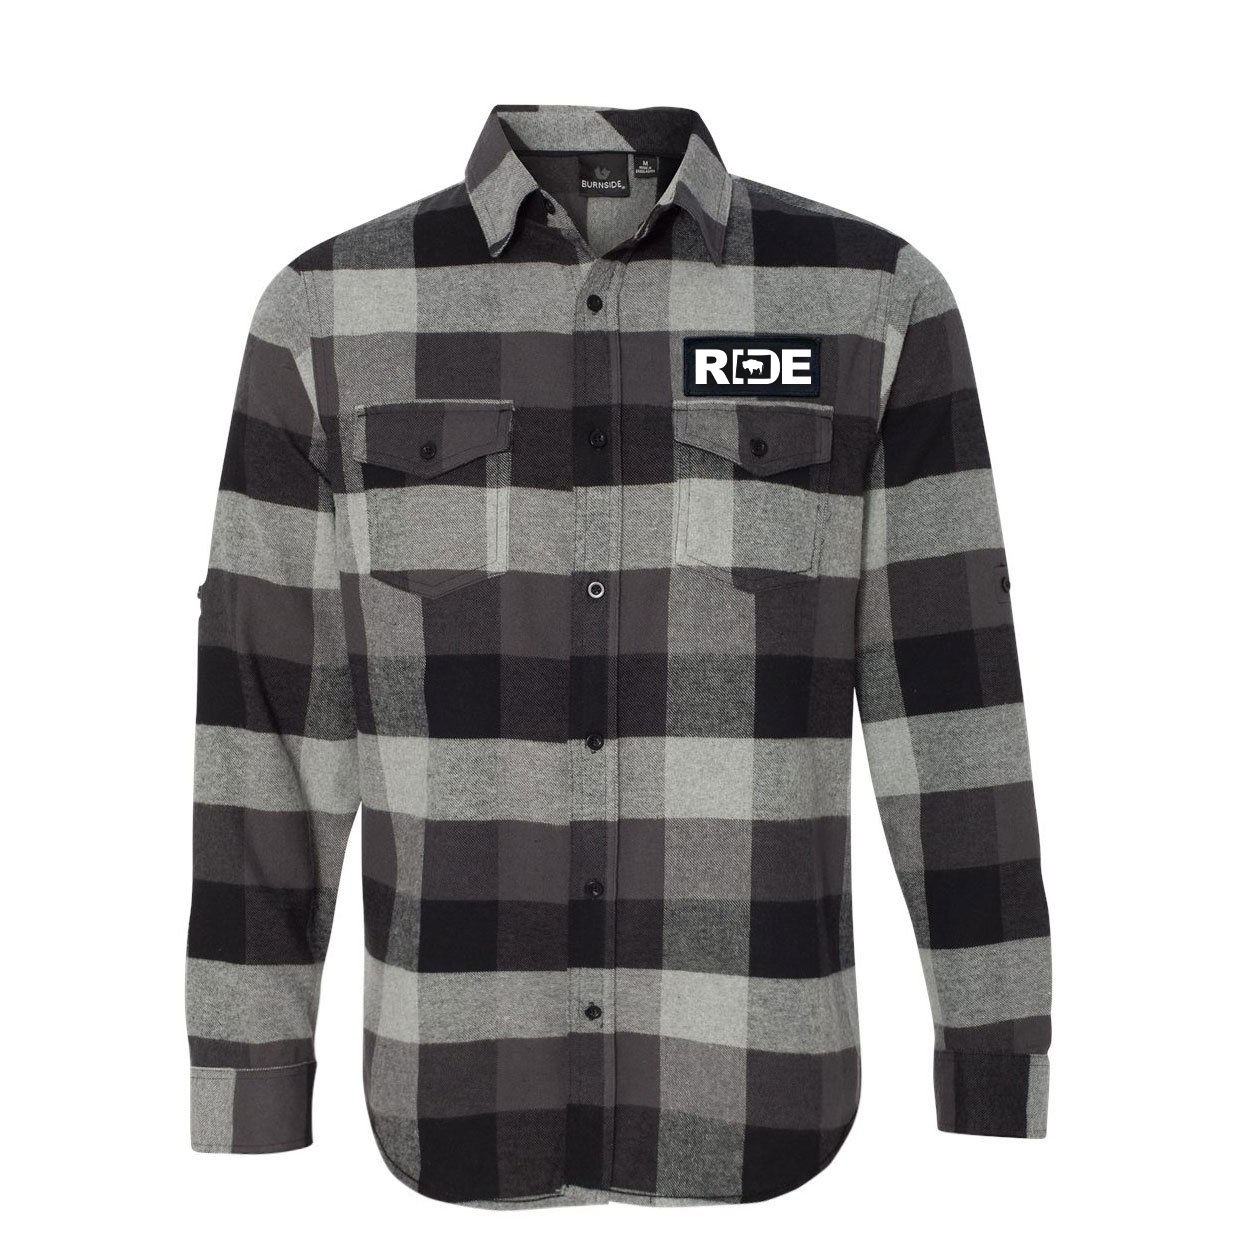 Ride Wyoming Classic Unisex Long Sleeve Woven Patch Flannel Shirt Black/Gray (White Logo)